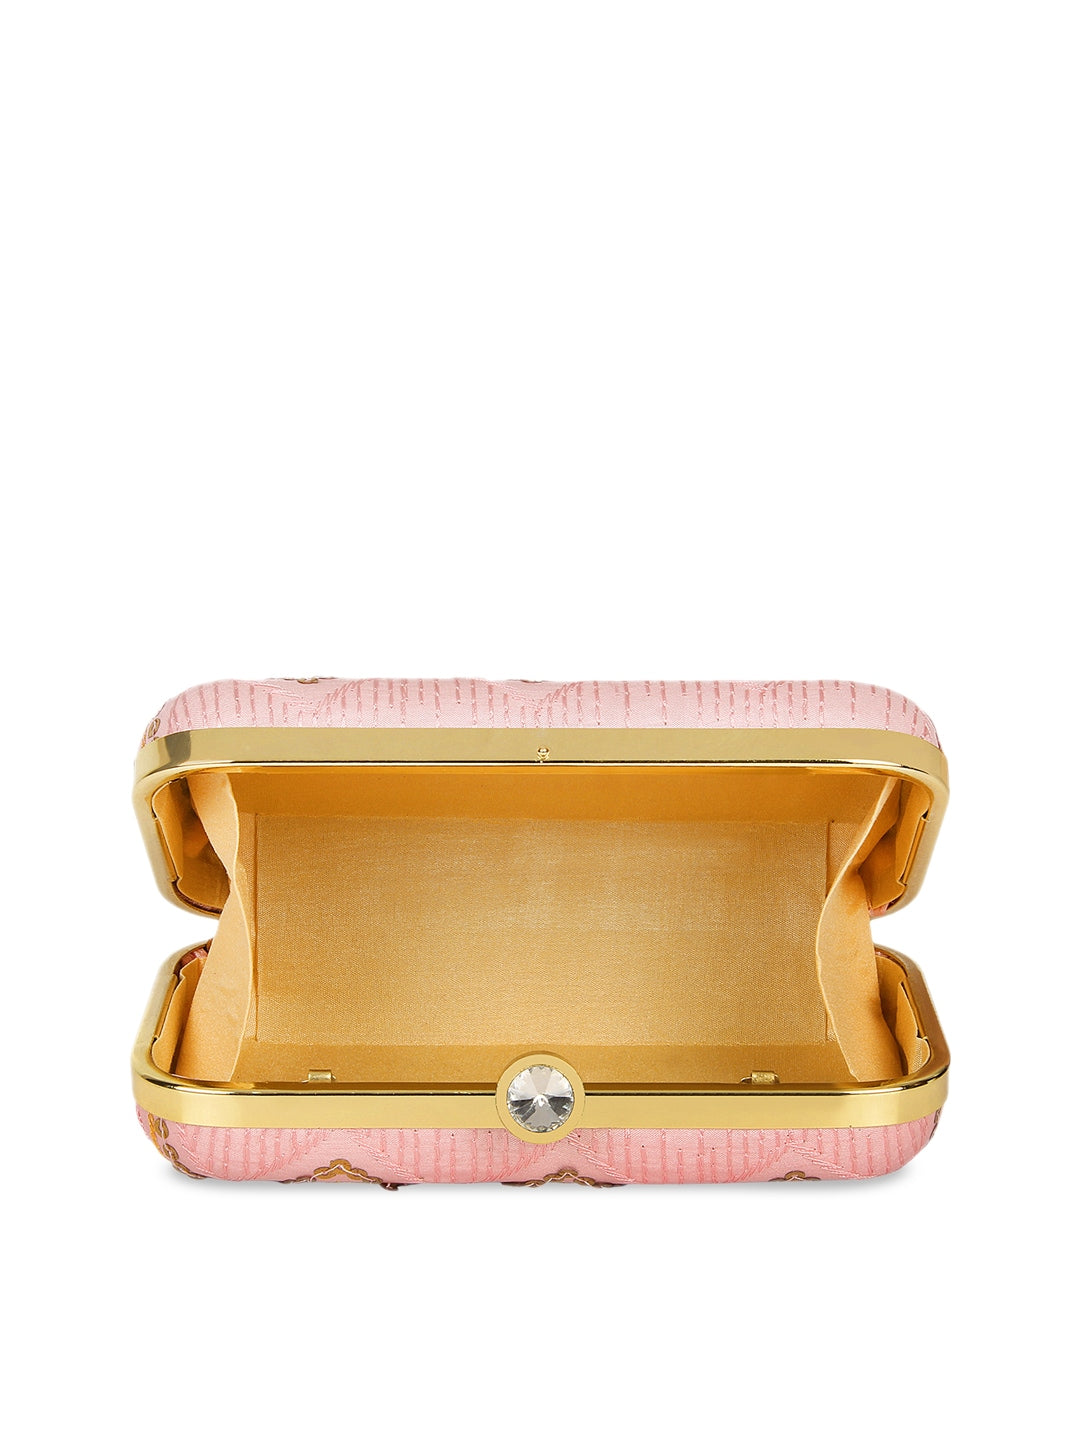 Anekaant Pink & Gold-Toned Embroidered Clutch - Distacart